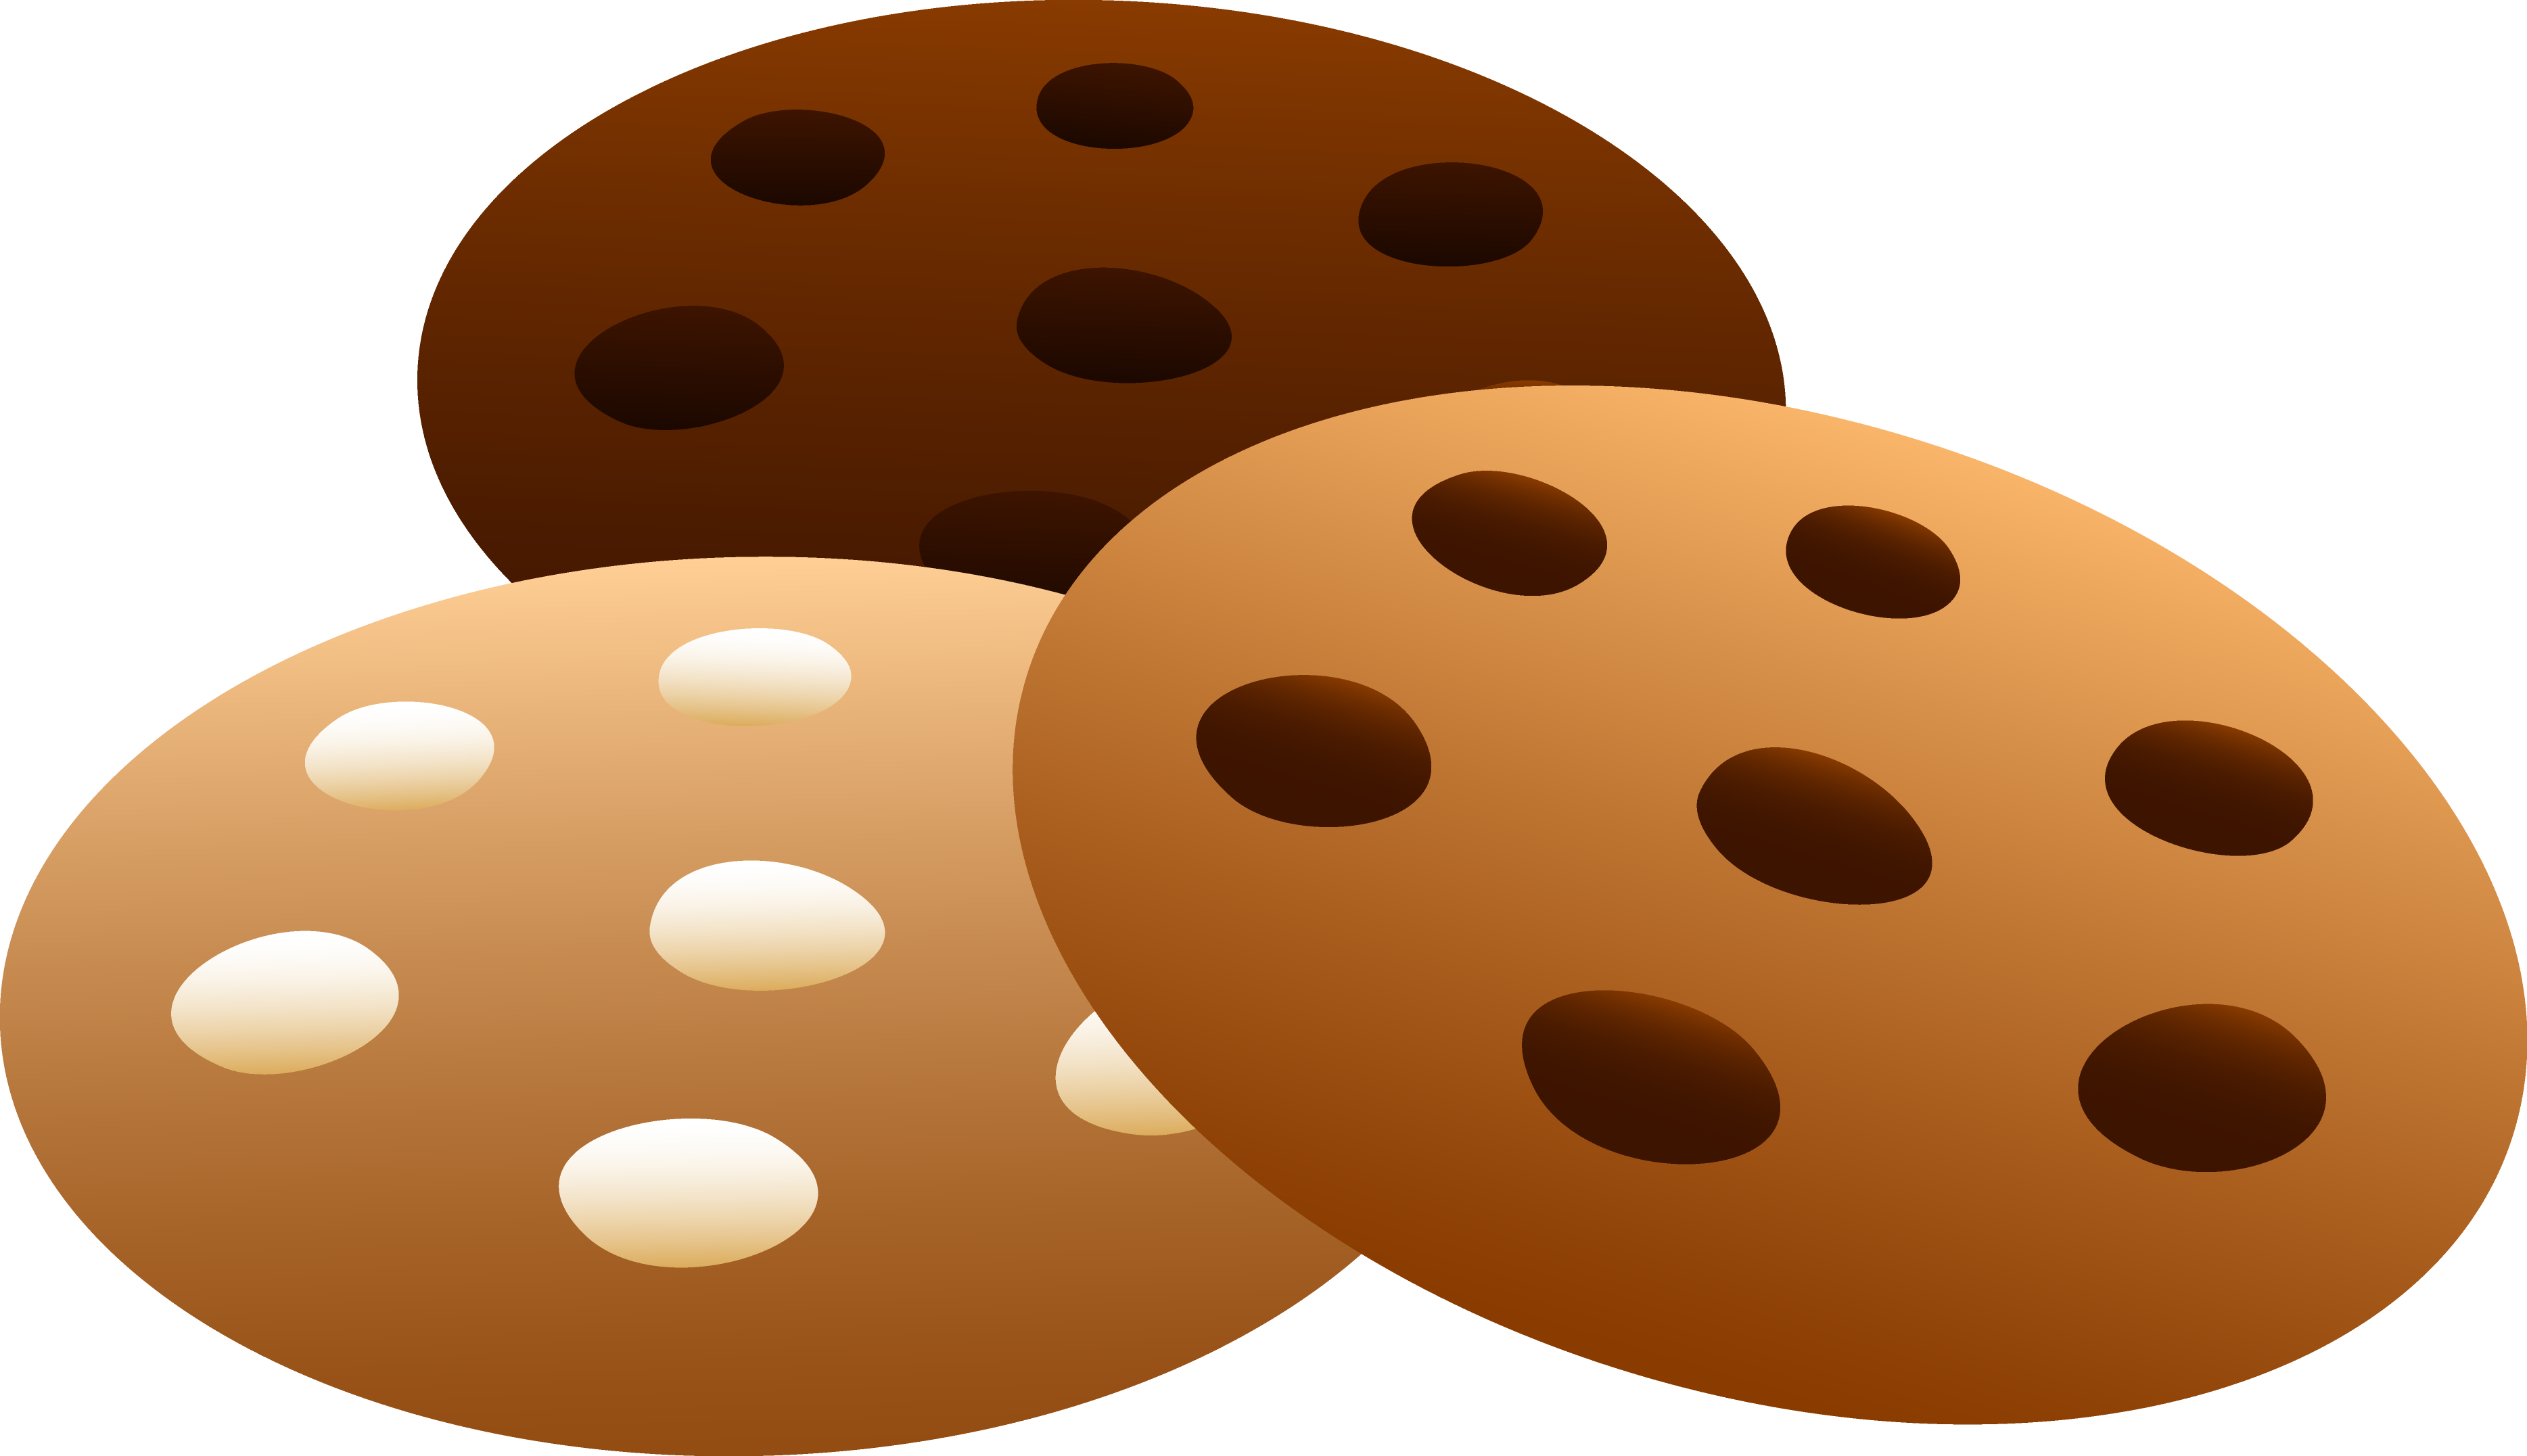 Plate clipart chocolate chip cookie. Clip art images clipartall